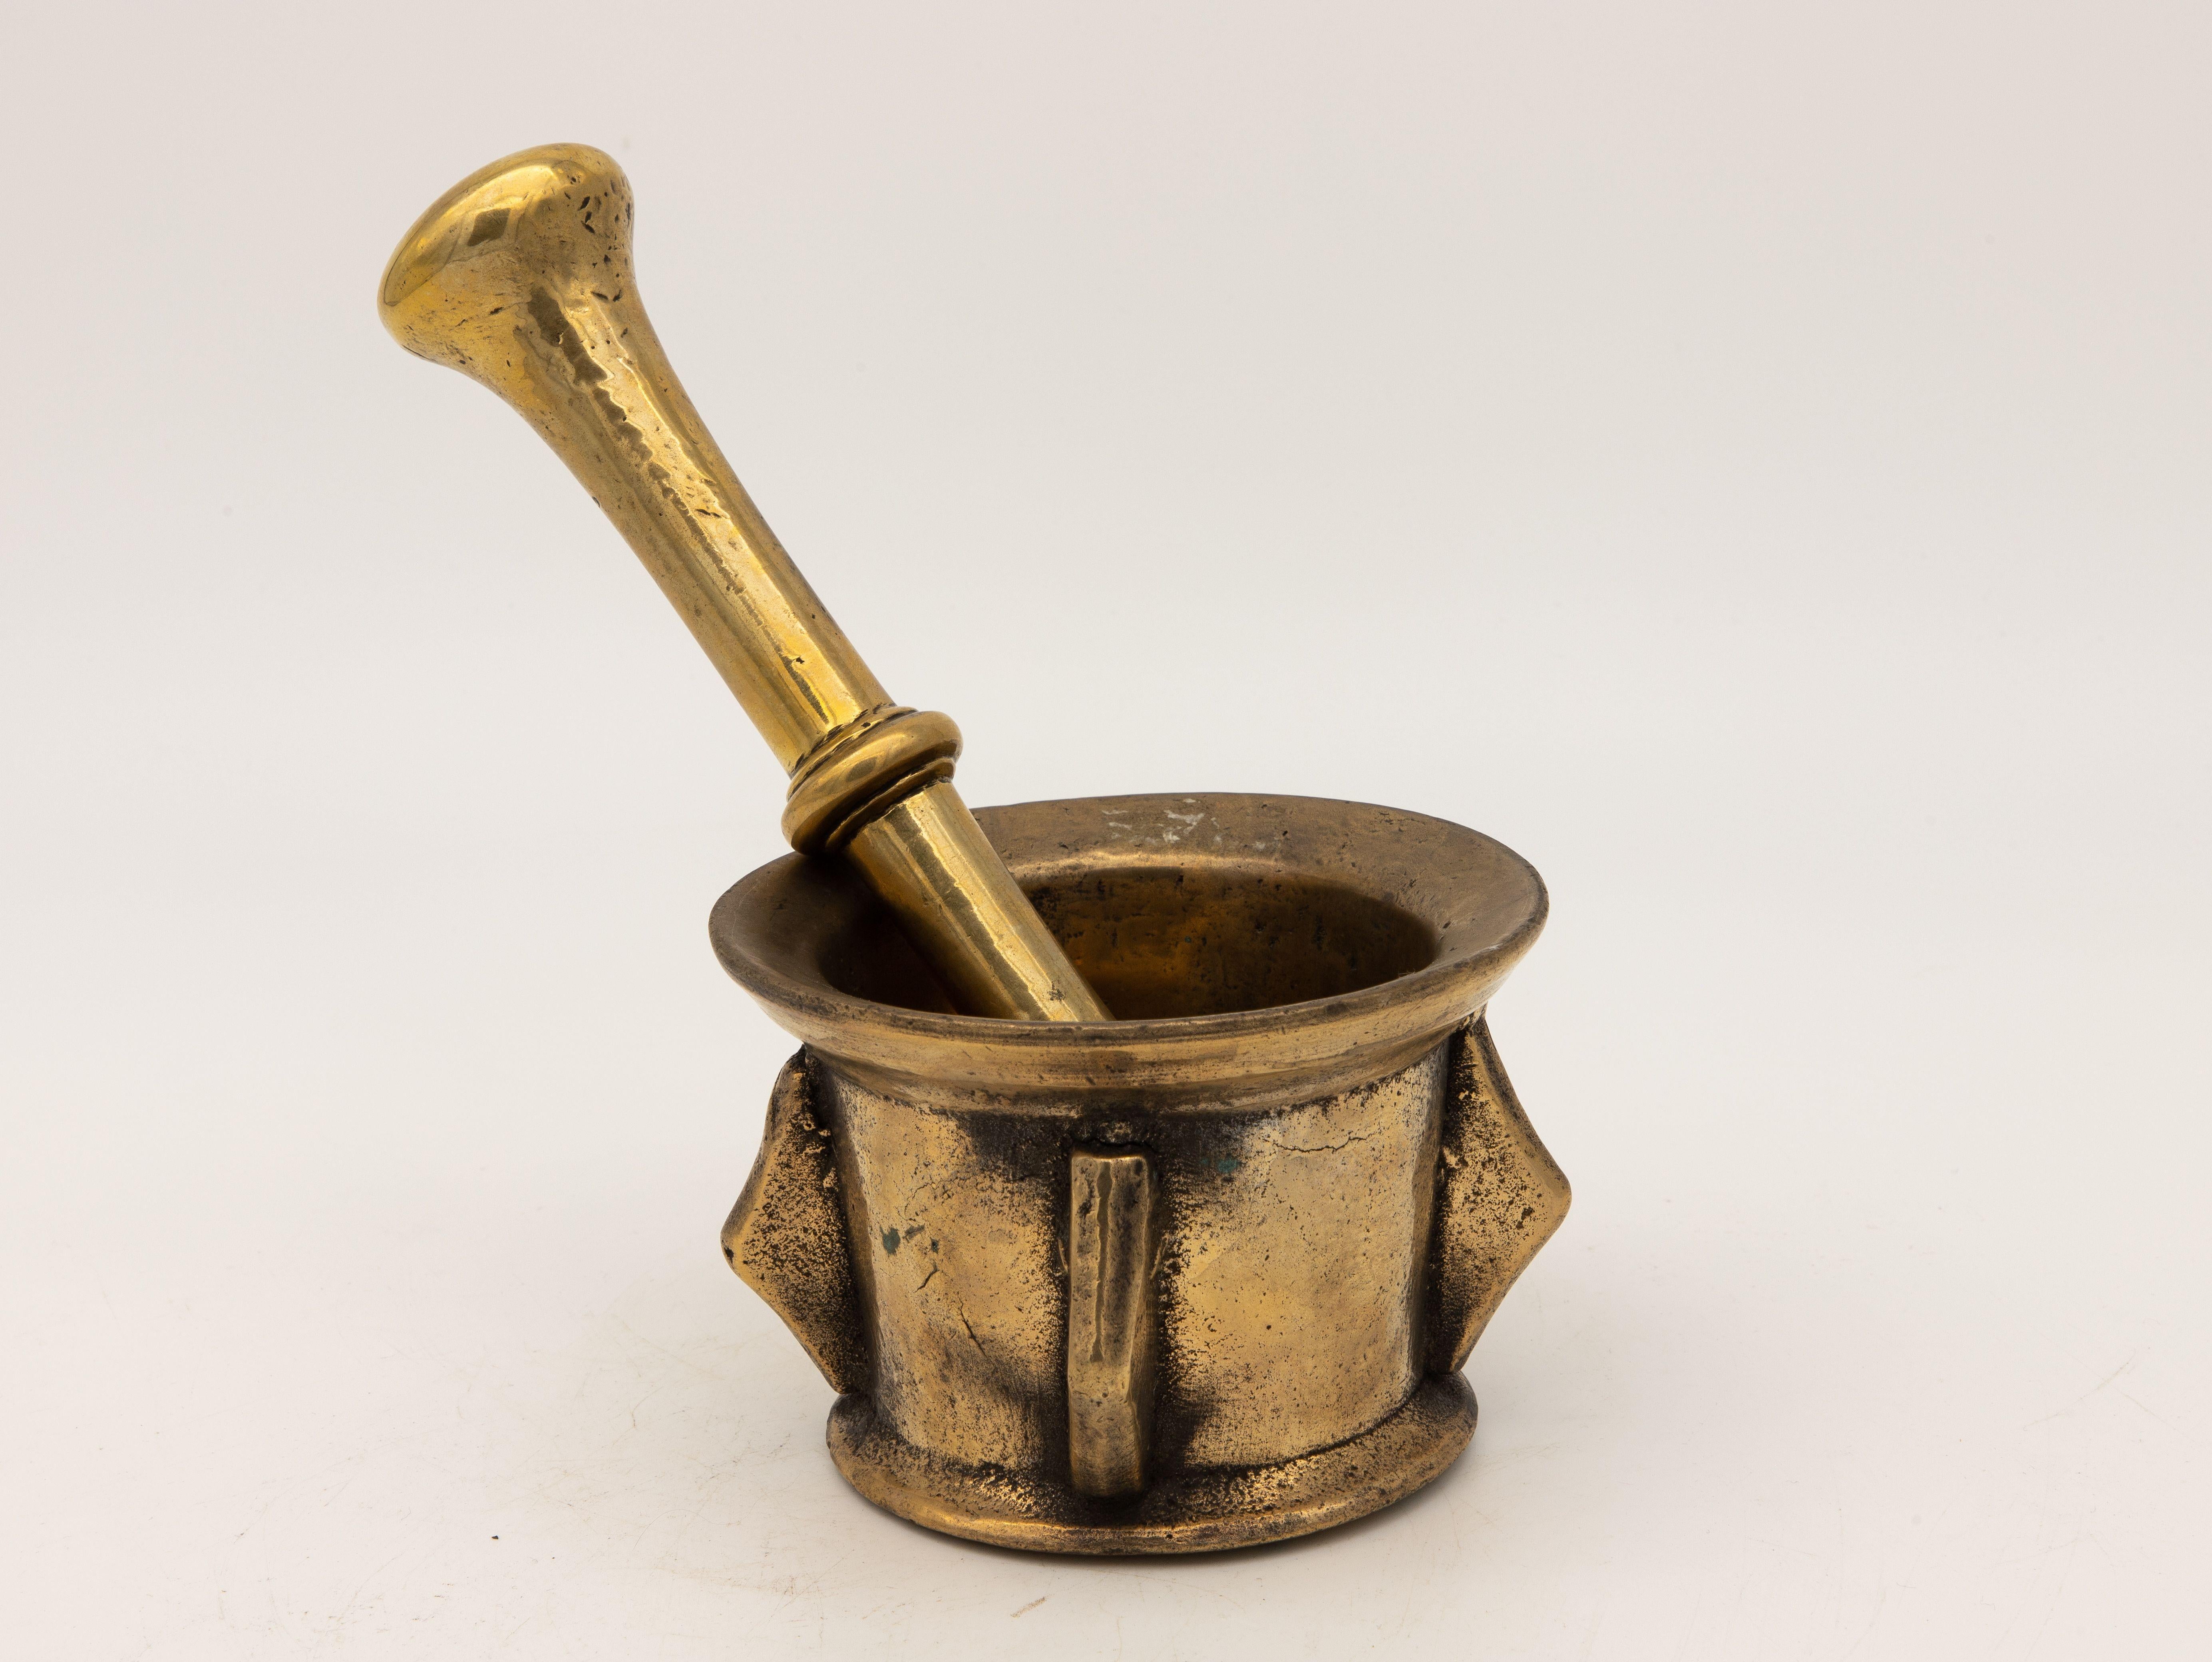 This early 20th-century mortar and pestle made of brass with an honest patina. Both the mortar and pestle are traditional in style. The mortar has a classic bell-shaped body typical of the style and the pestle has round ends on each side. Brass